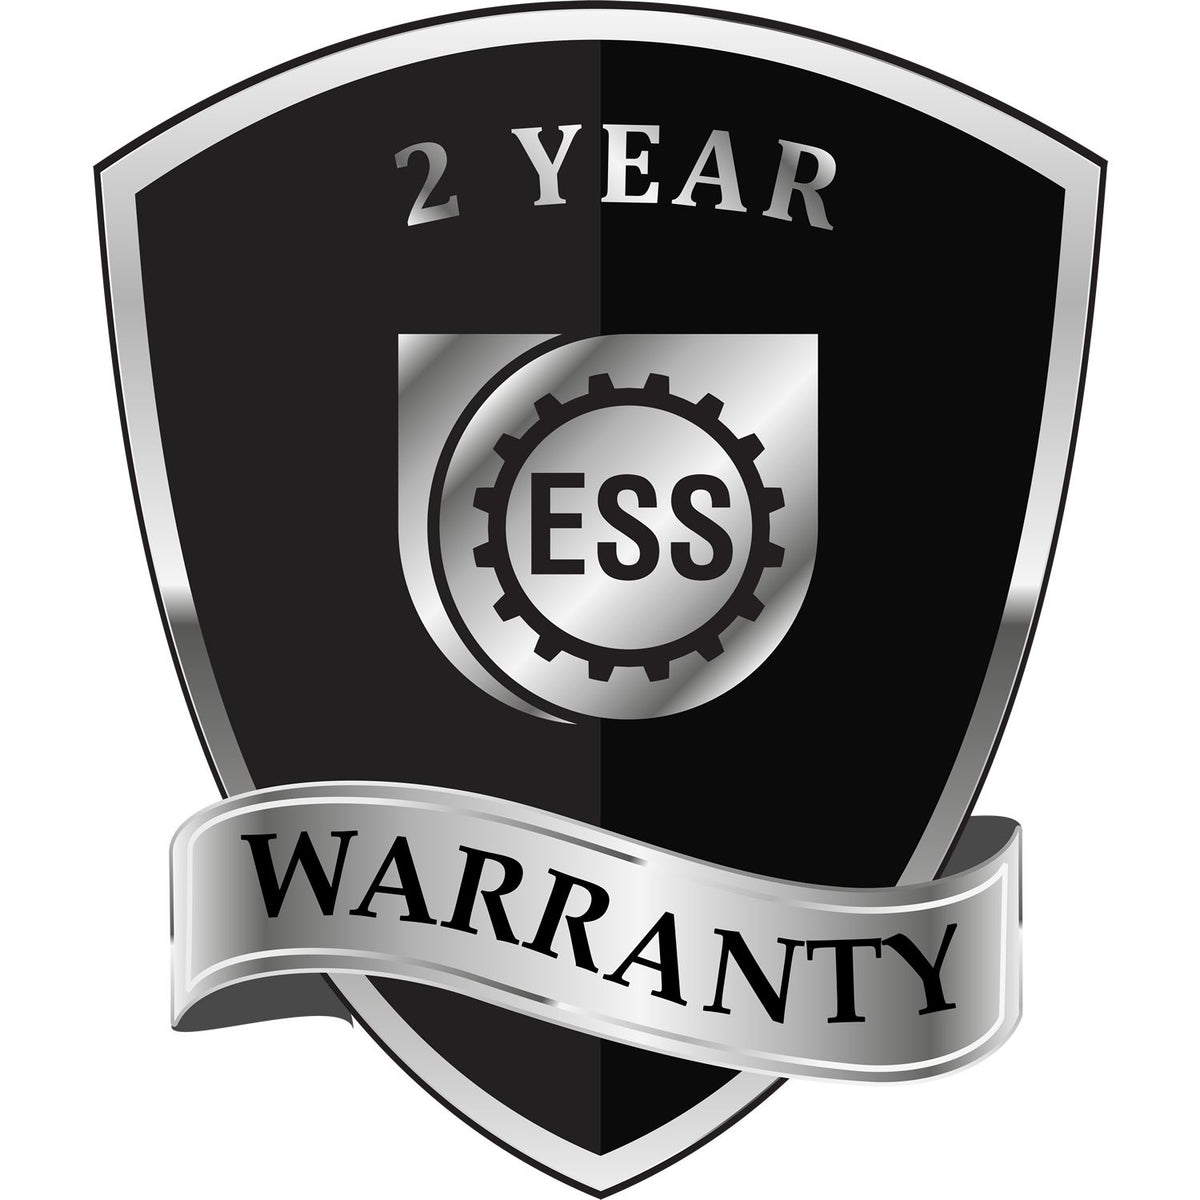 A black and silver badge or emblem showing warranty information for the Gift Louisiana Land Surveyor Seal